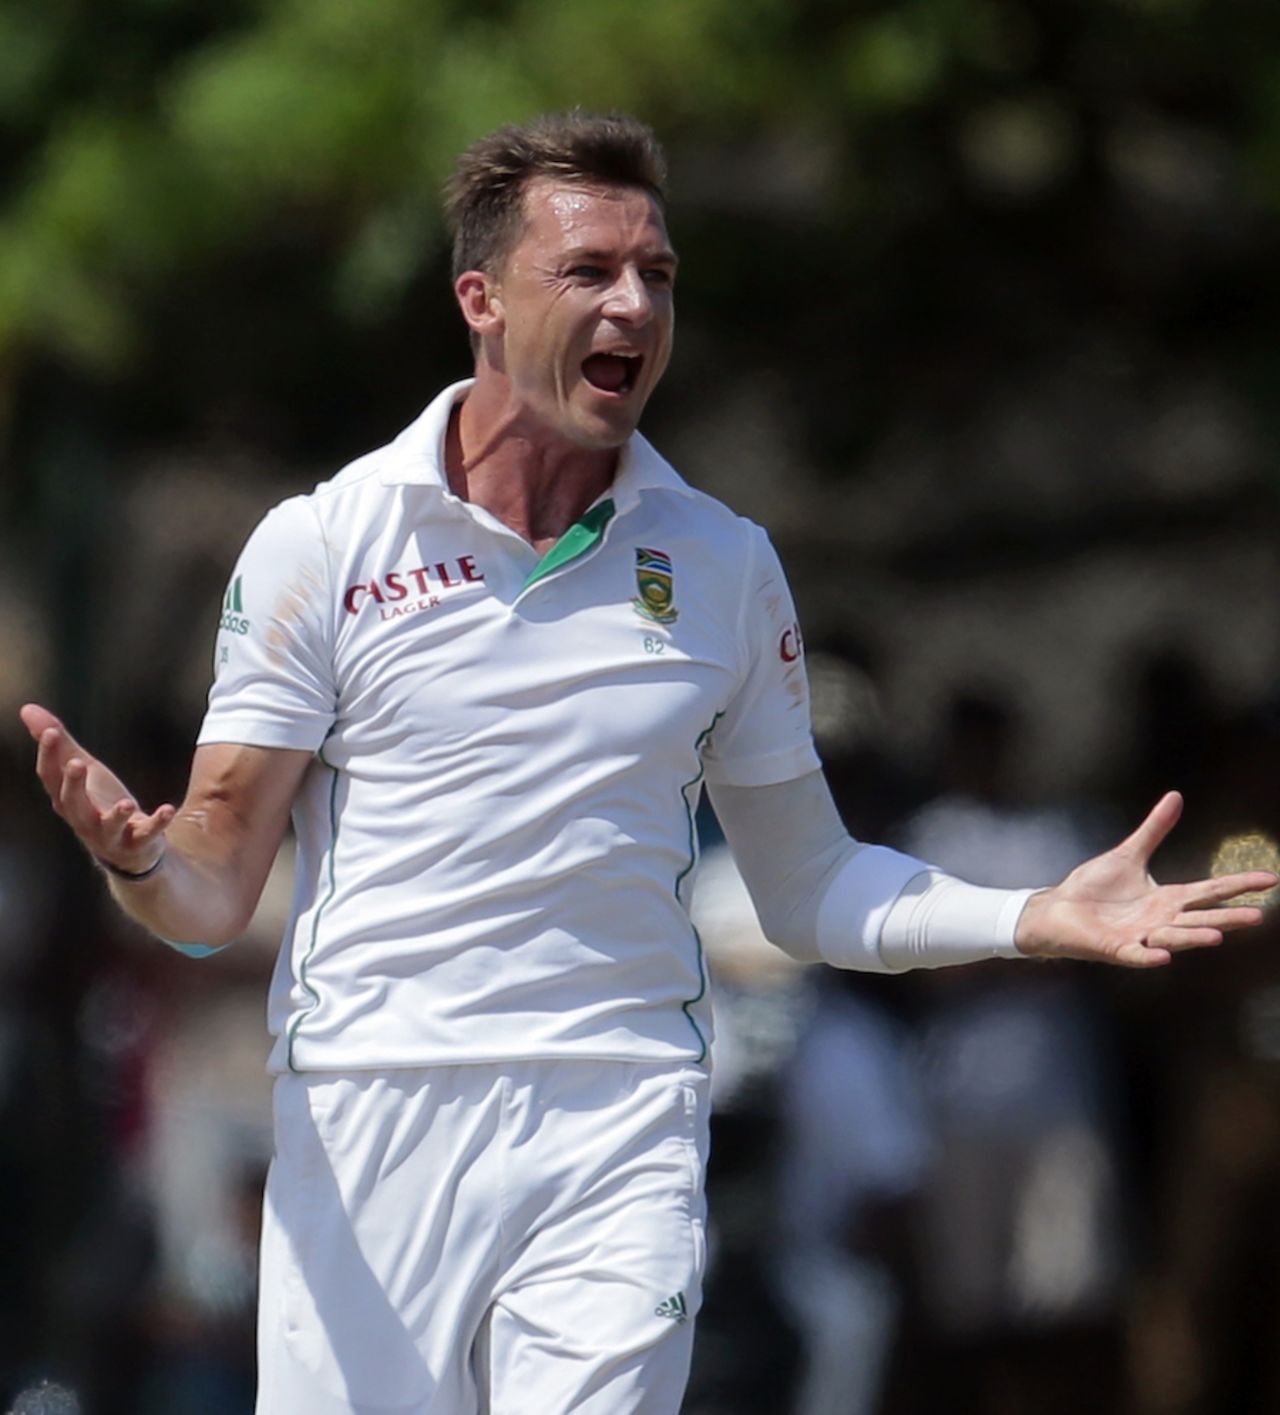 Dale Steyn picked up four wickets on a spinner's pitch, Sri Lanka v South Africa, 1st Test, Galle, 5th day, July 20, 2014